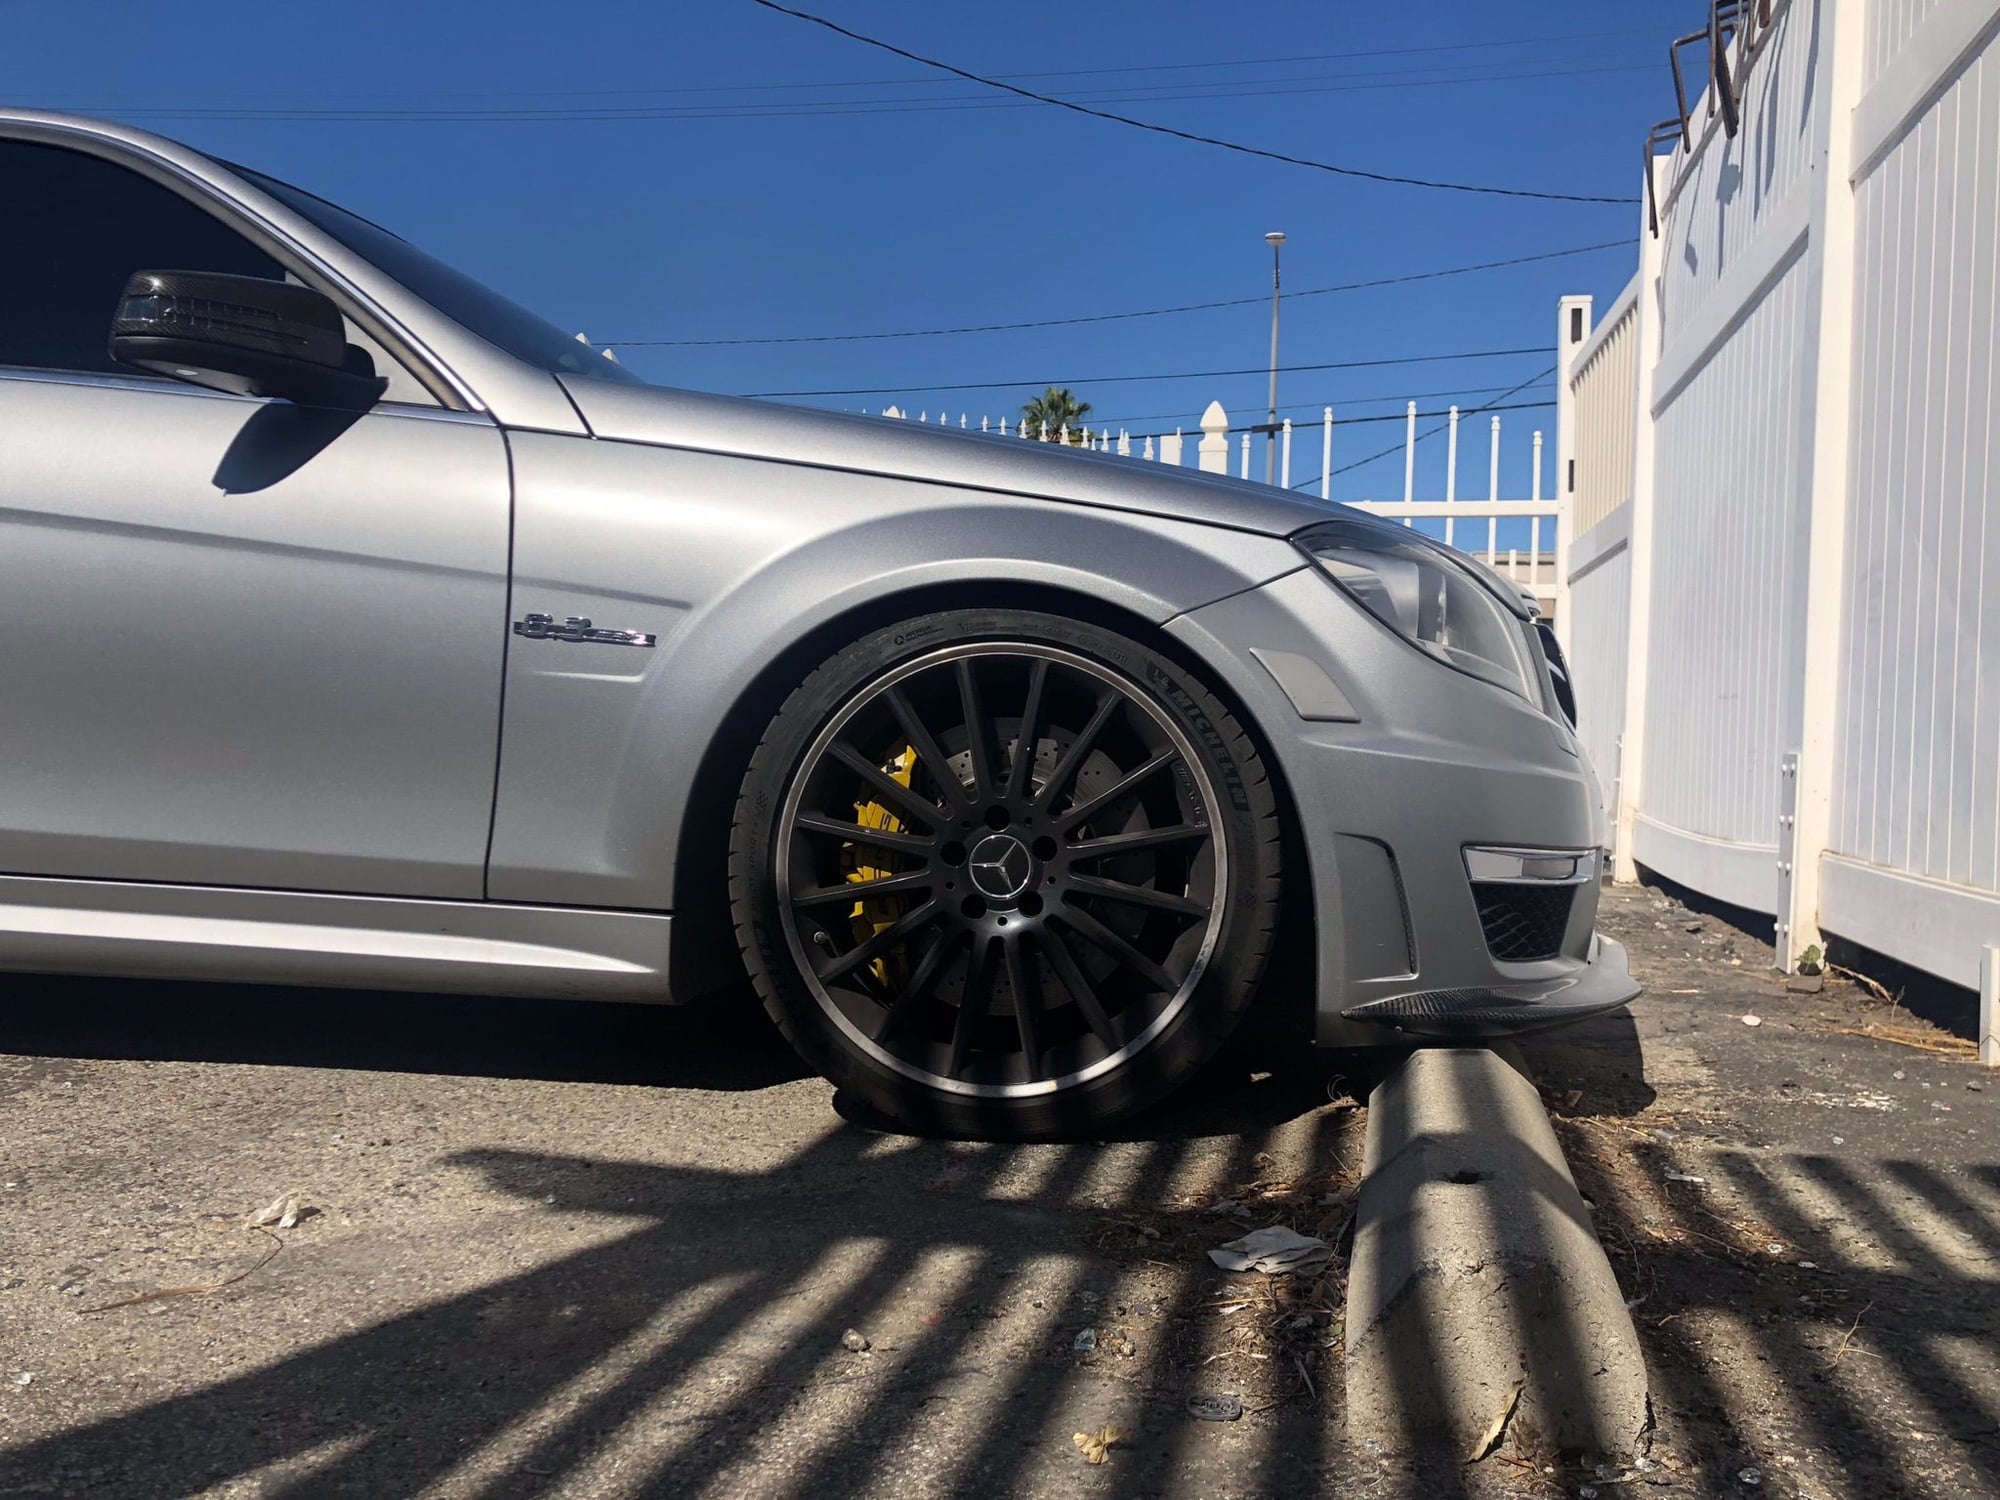 Wheels and Tires/Axles - 2012 MERCEDES BENZ C63 EDITION 1 WHEELS - Used - 2012 to 2014 Mercedes-Benz C63 AMG - Van Nuys, CA 91405, United States